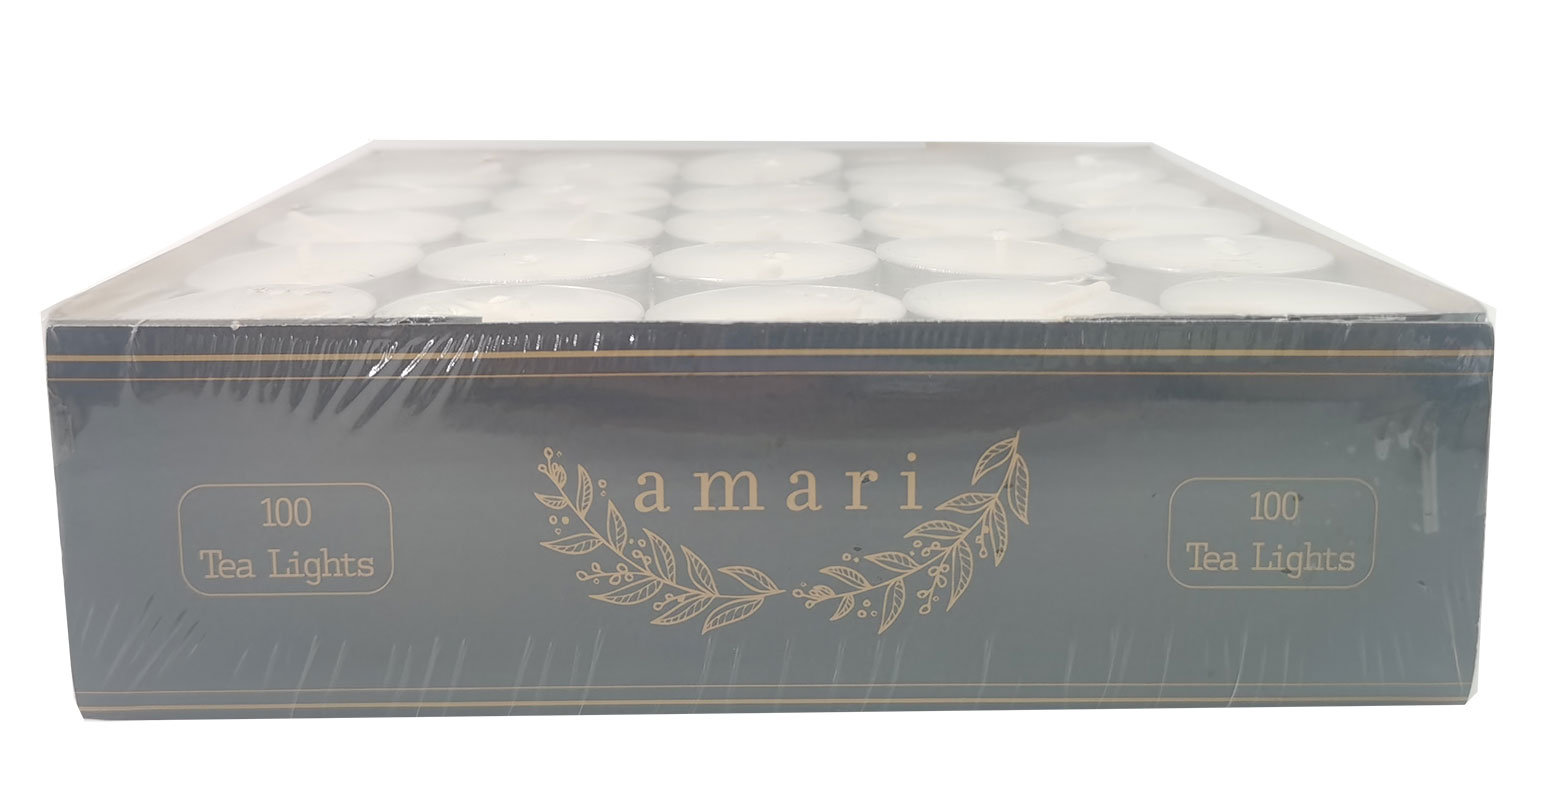 Amari White Unscented Indoor/Outdoor Tealight Candles, 100 Count - image 3 of 6